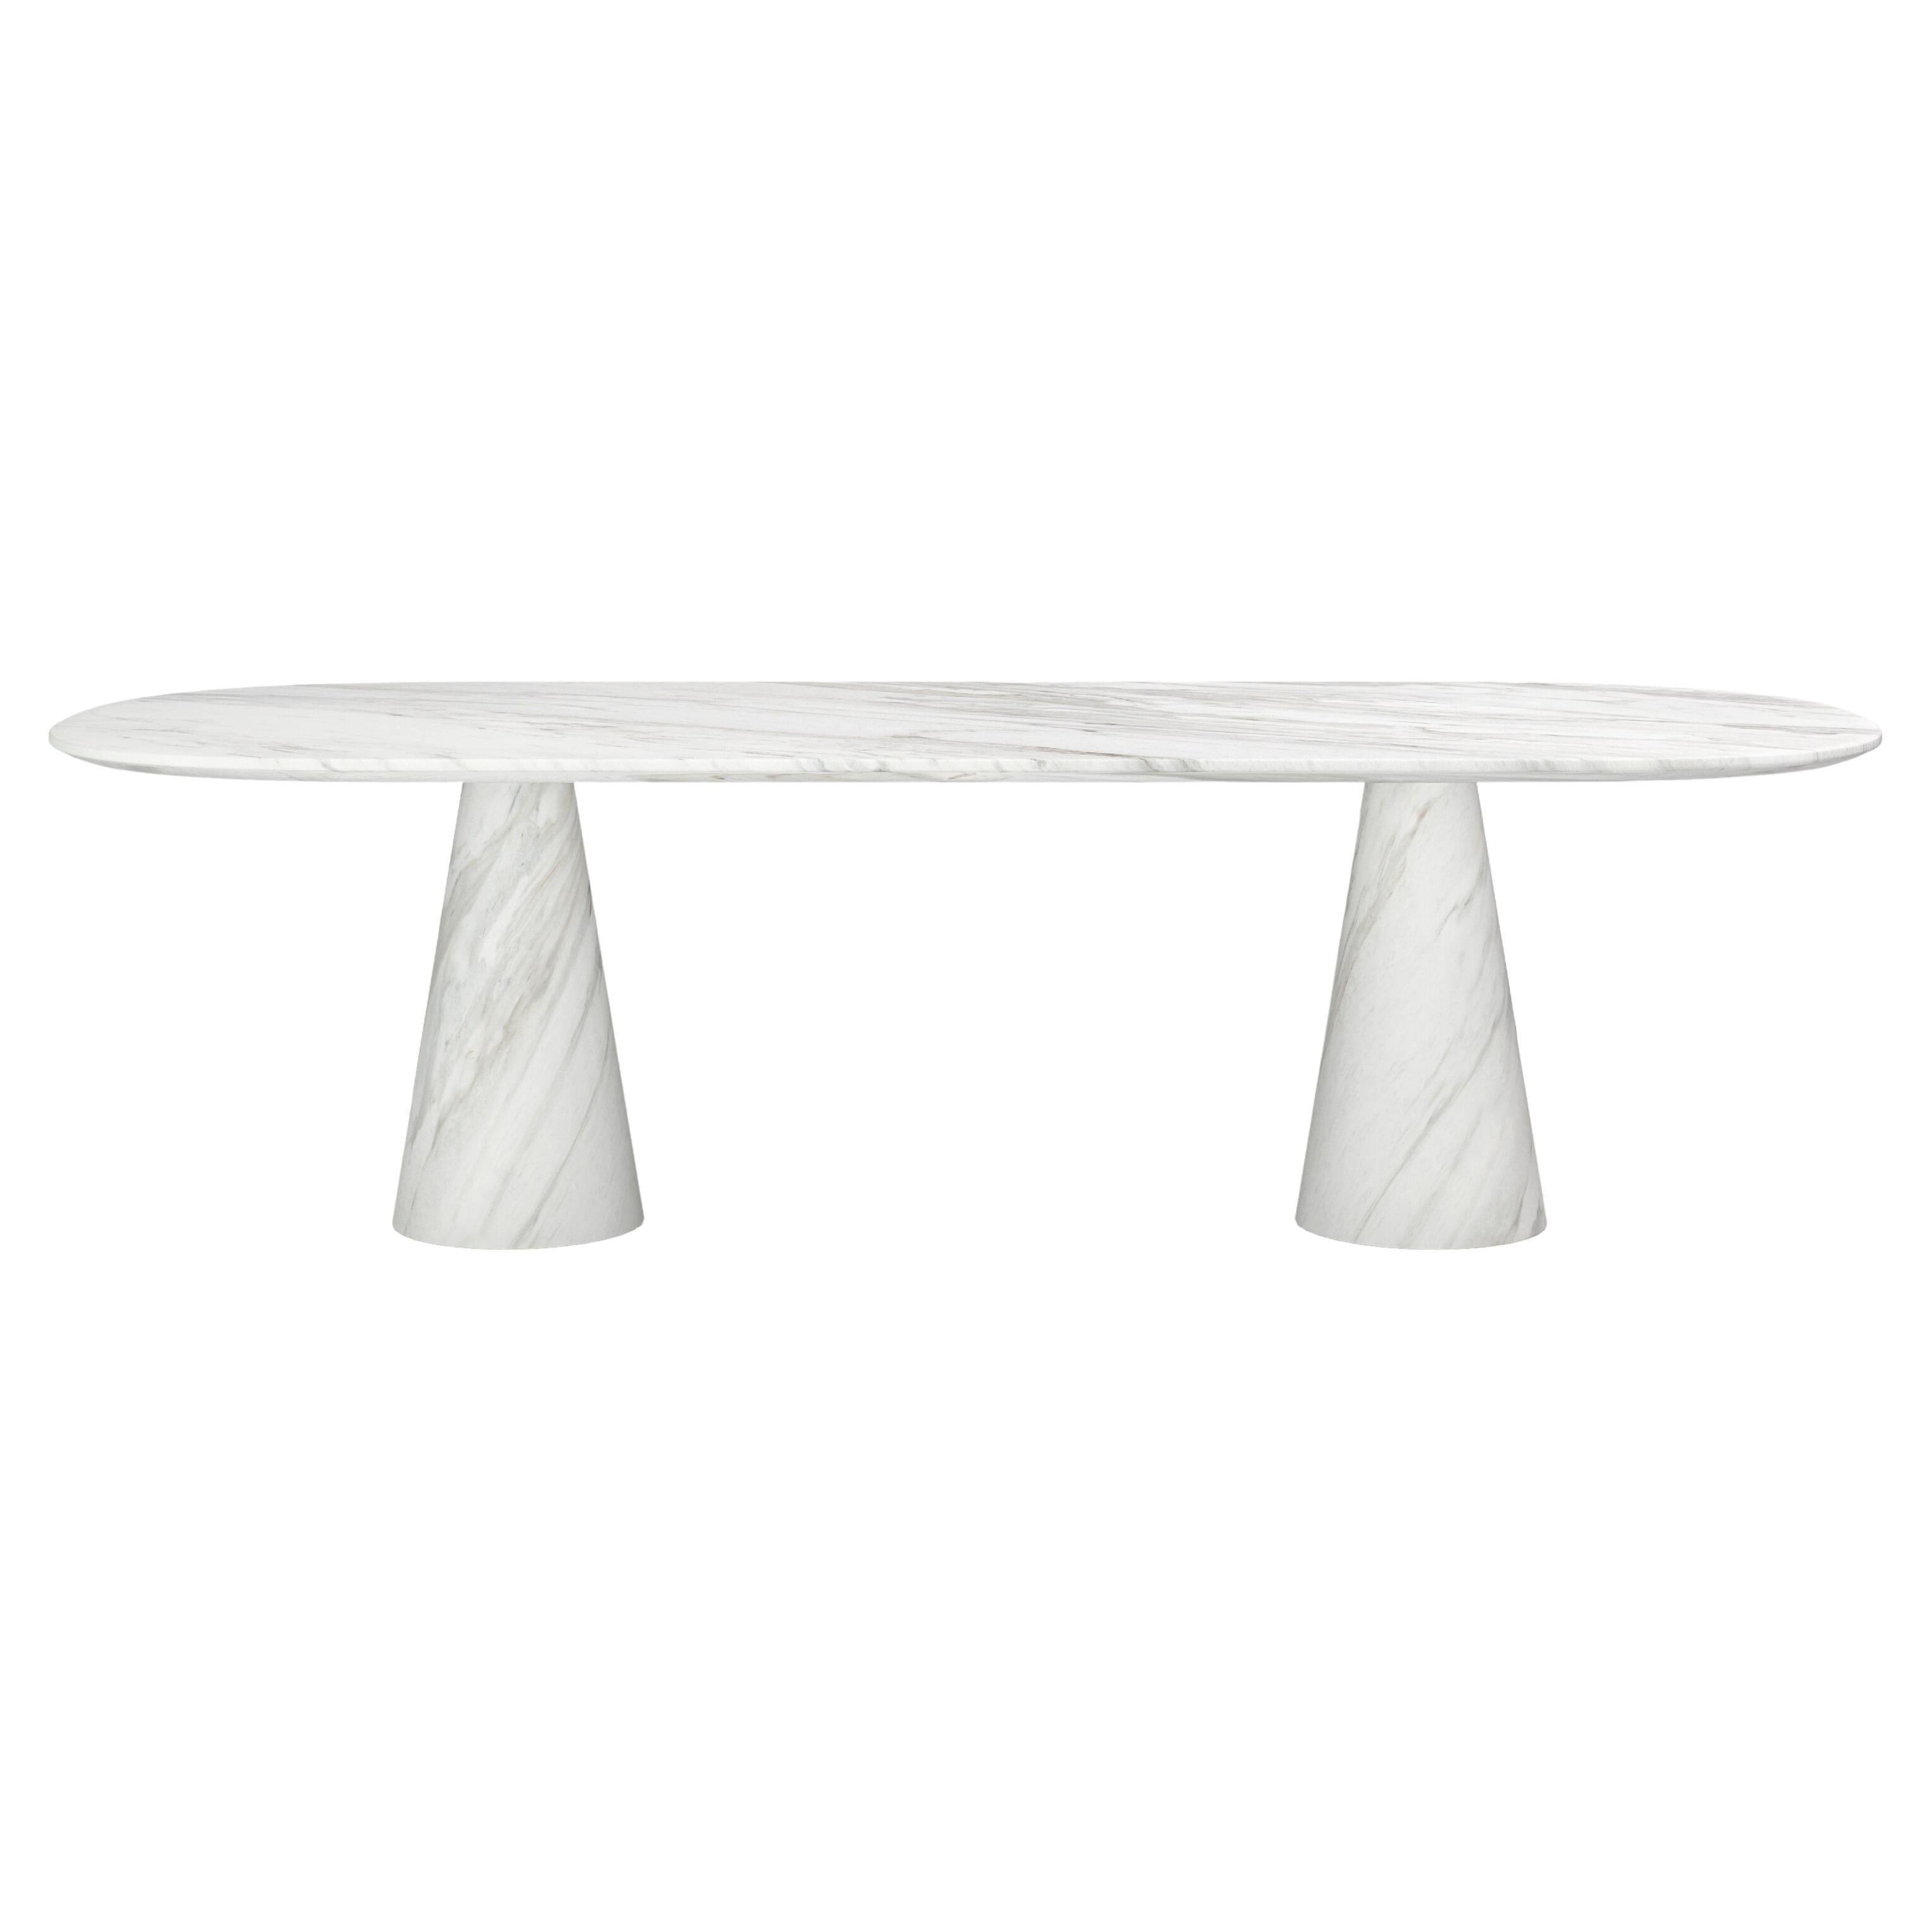 FORM(LA) Cono Oval Dining Table 118”L x 48”W x 30”H Volakas White Marble For Sale